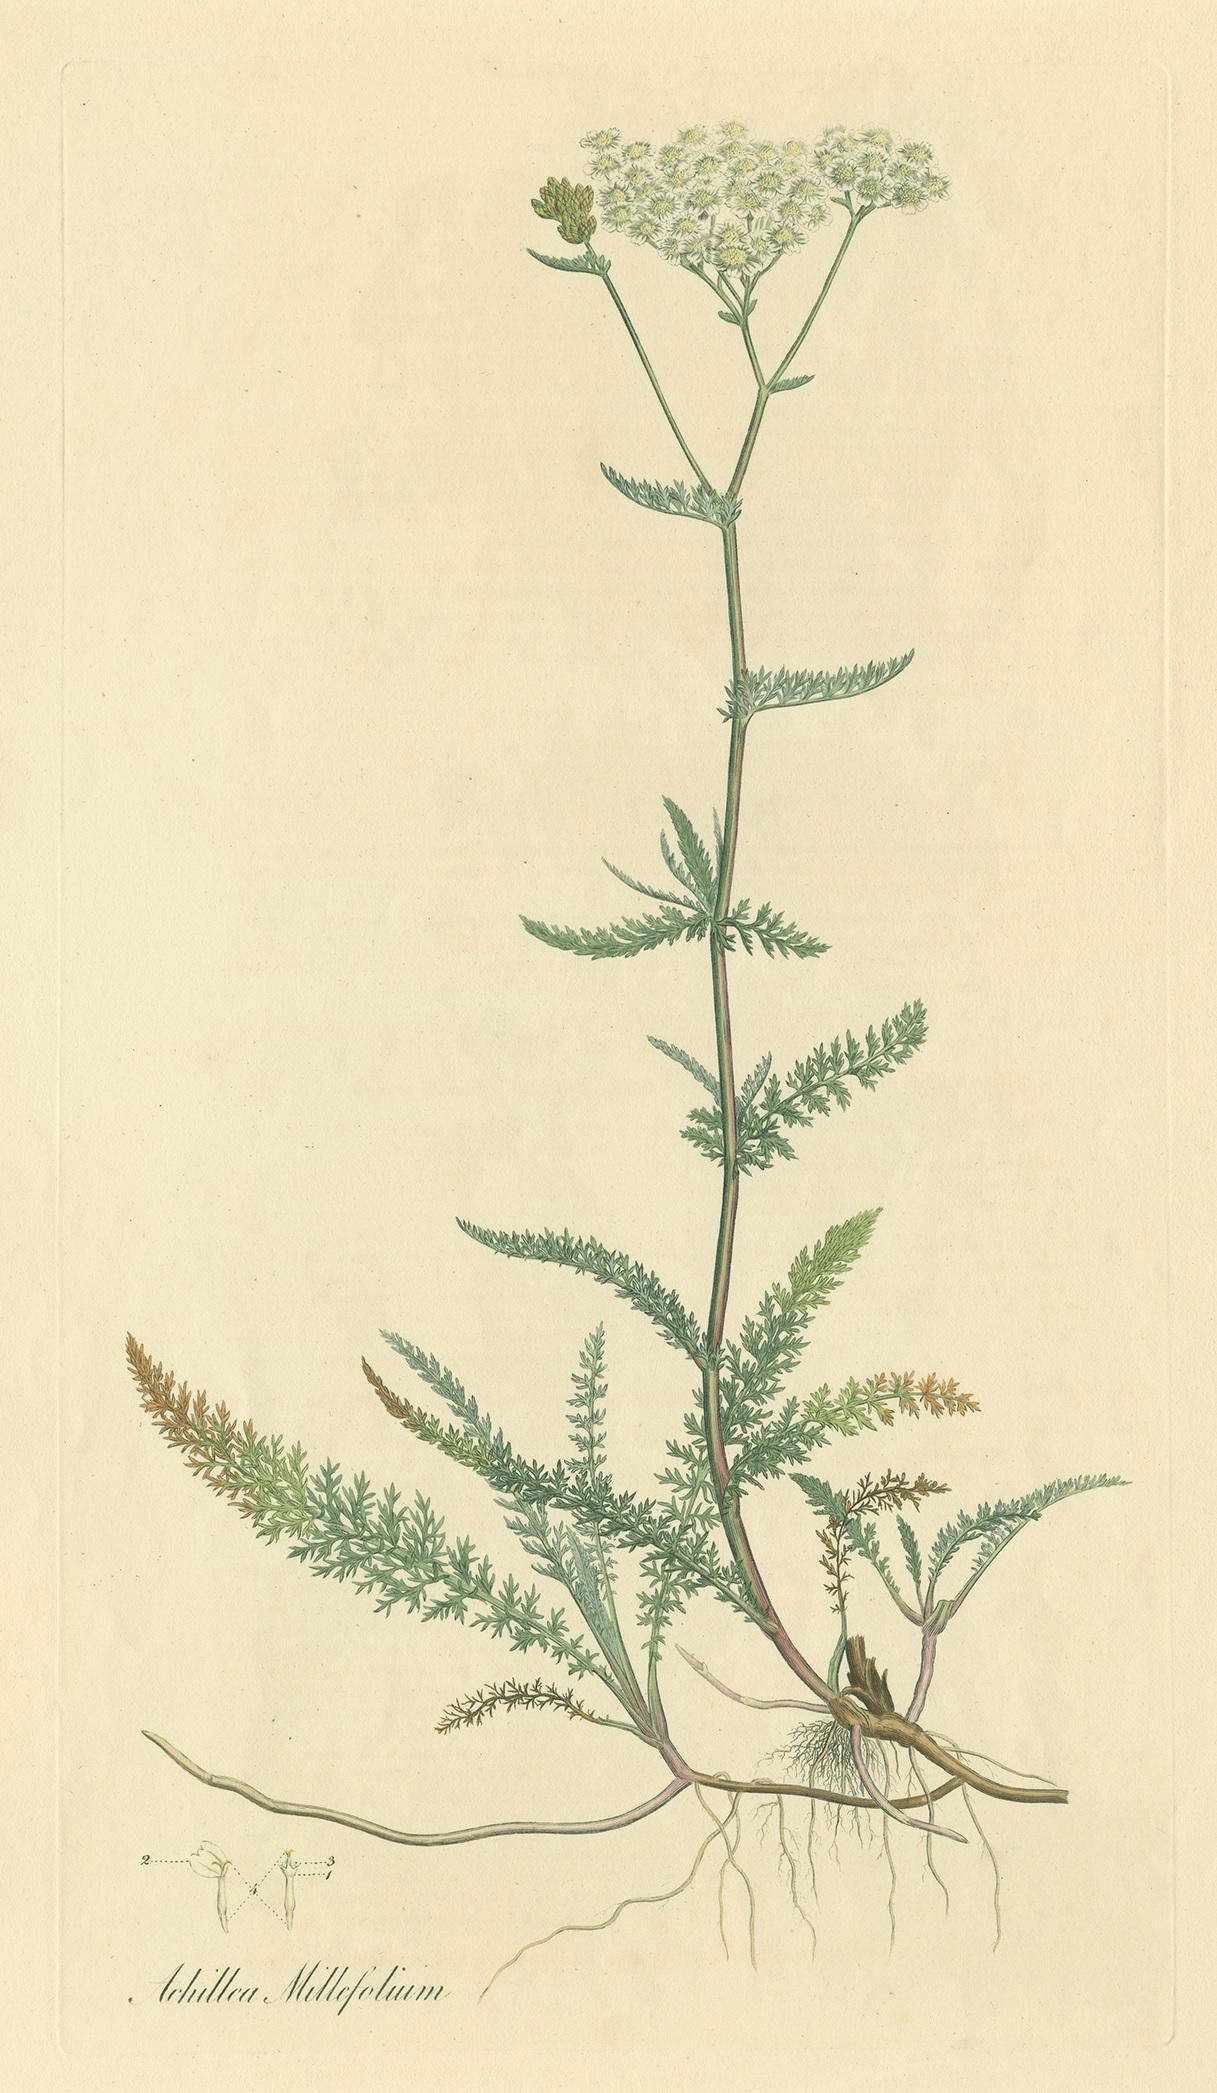 Antique botany print titled 'Achillea Millefolium'. Hand colored engraving of achillea millefolium, commonly known as yarrow or common yarrow. This print originates from 'Flora Londinensis' by William Curtis.